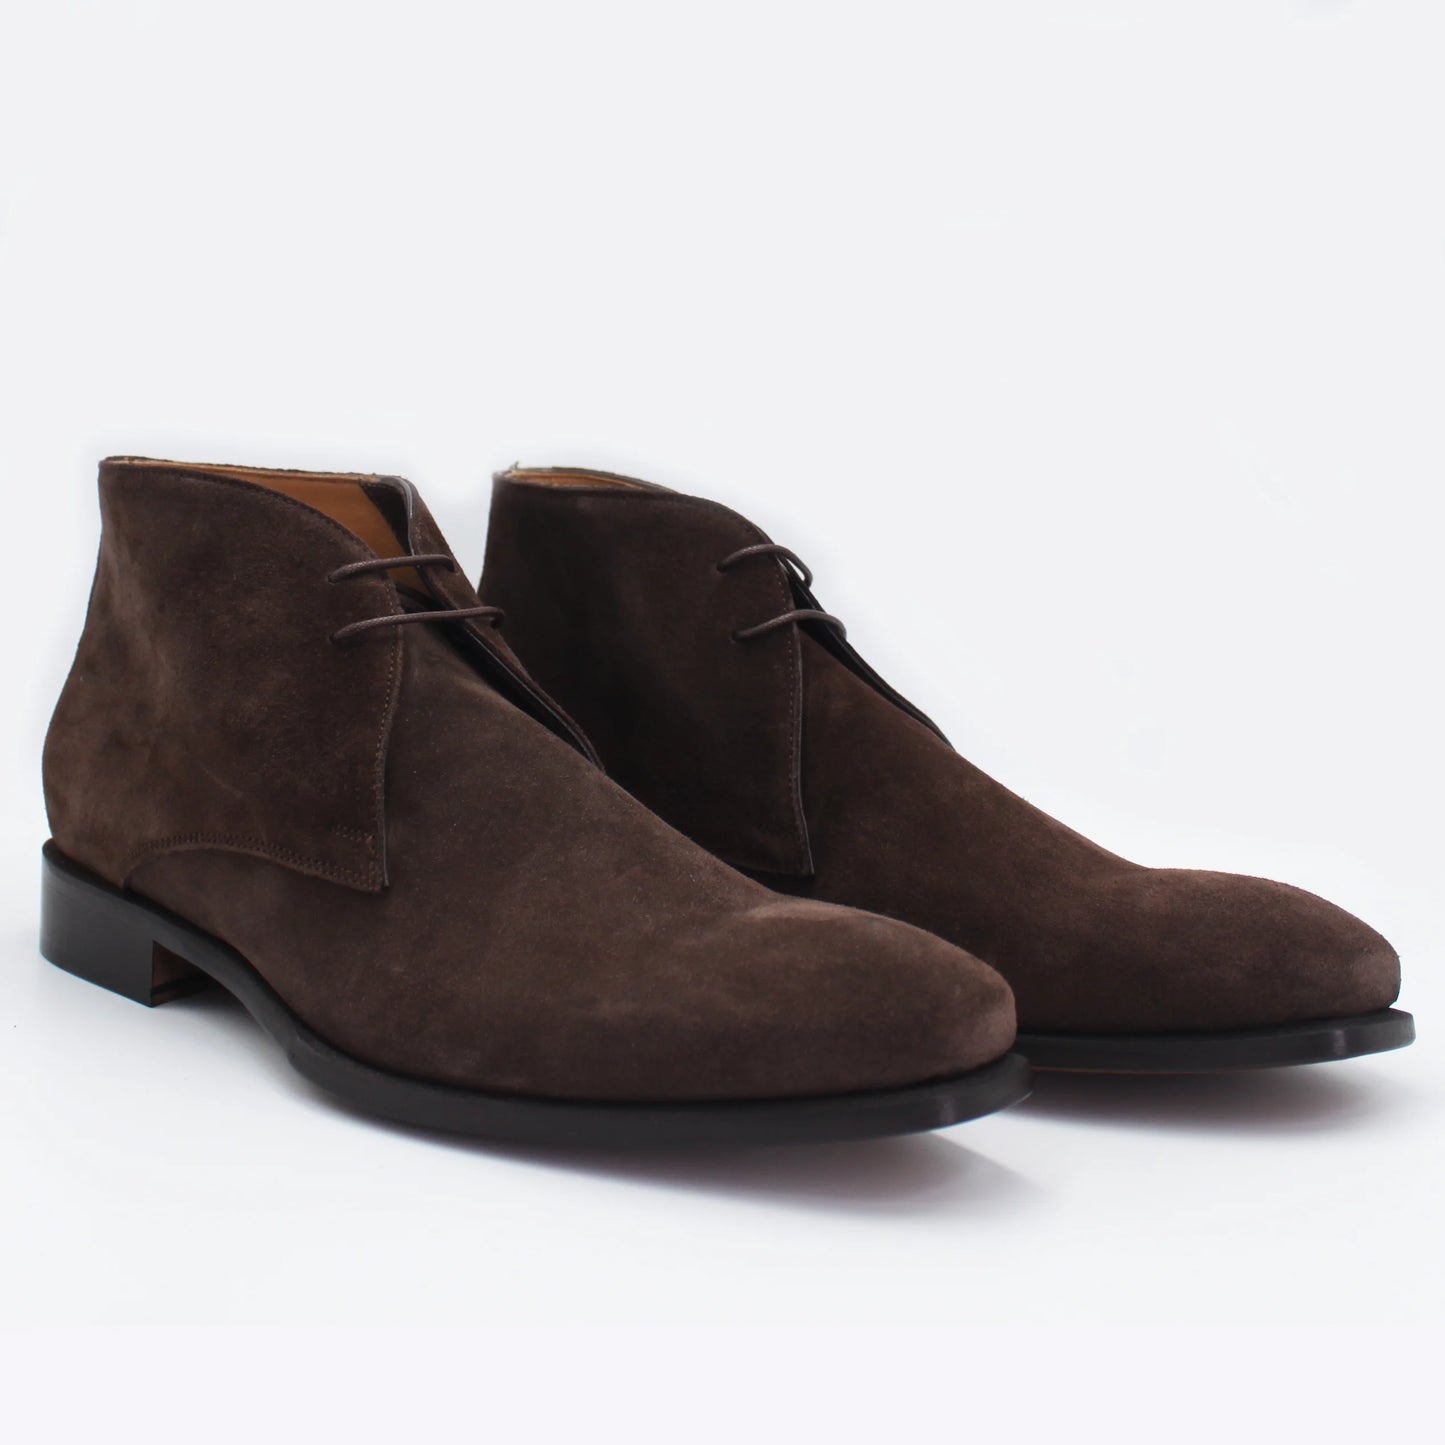 Shop Handmade Italian Suede Chukka Boot in Dark Brown (BE940-05) or browse our range of hand-made Italian boots for men in leather or suede in-store at Aliverti Durban or Cape Town, or shop online. We deliver in South Africa & offer multiple payment plans as well as accept multiple safe & secure payment methods.